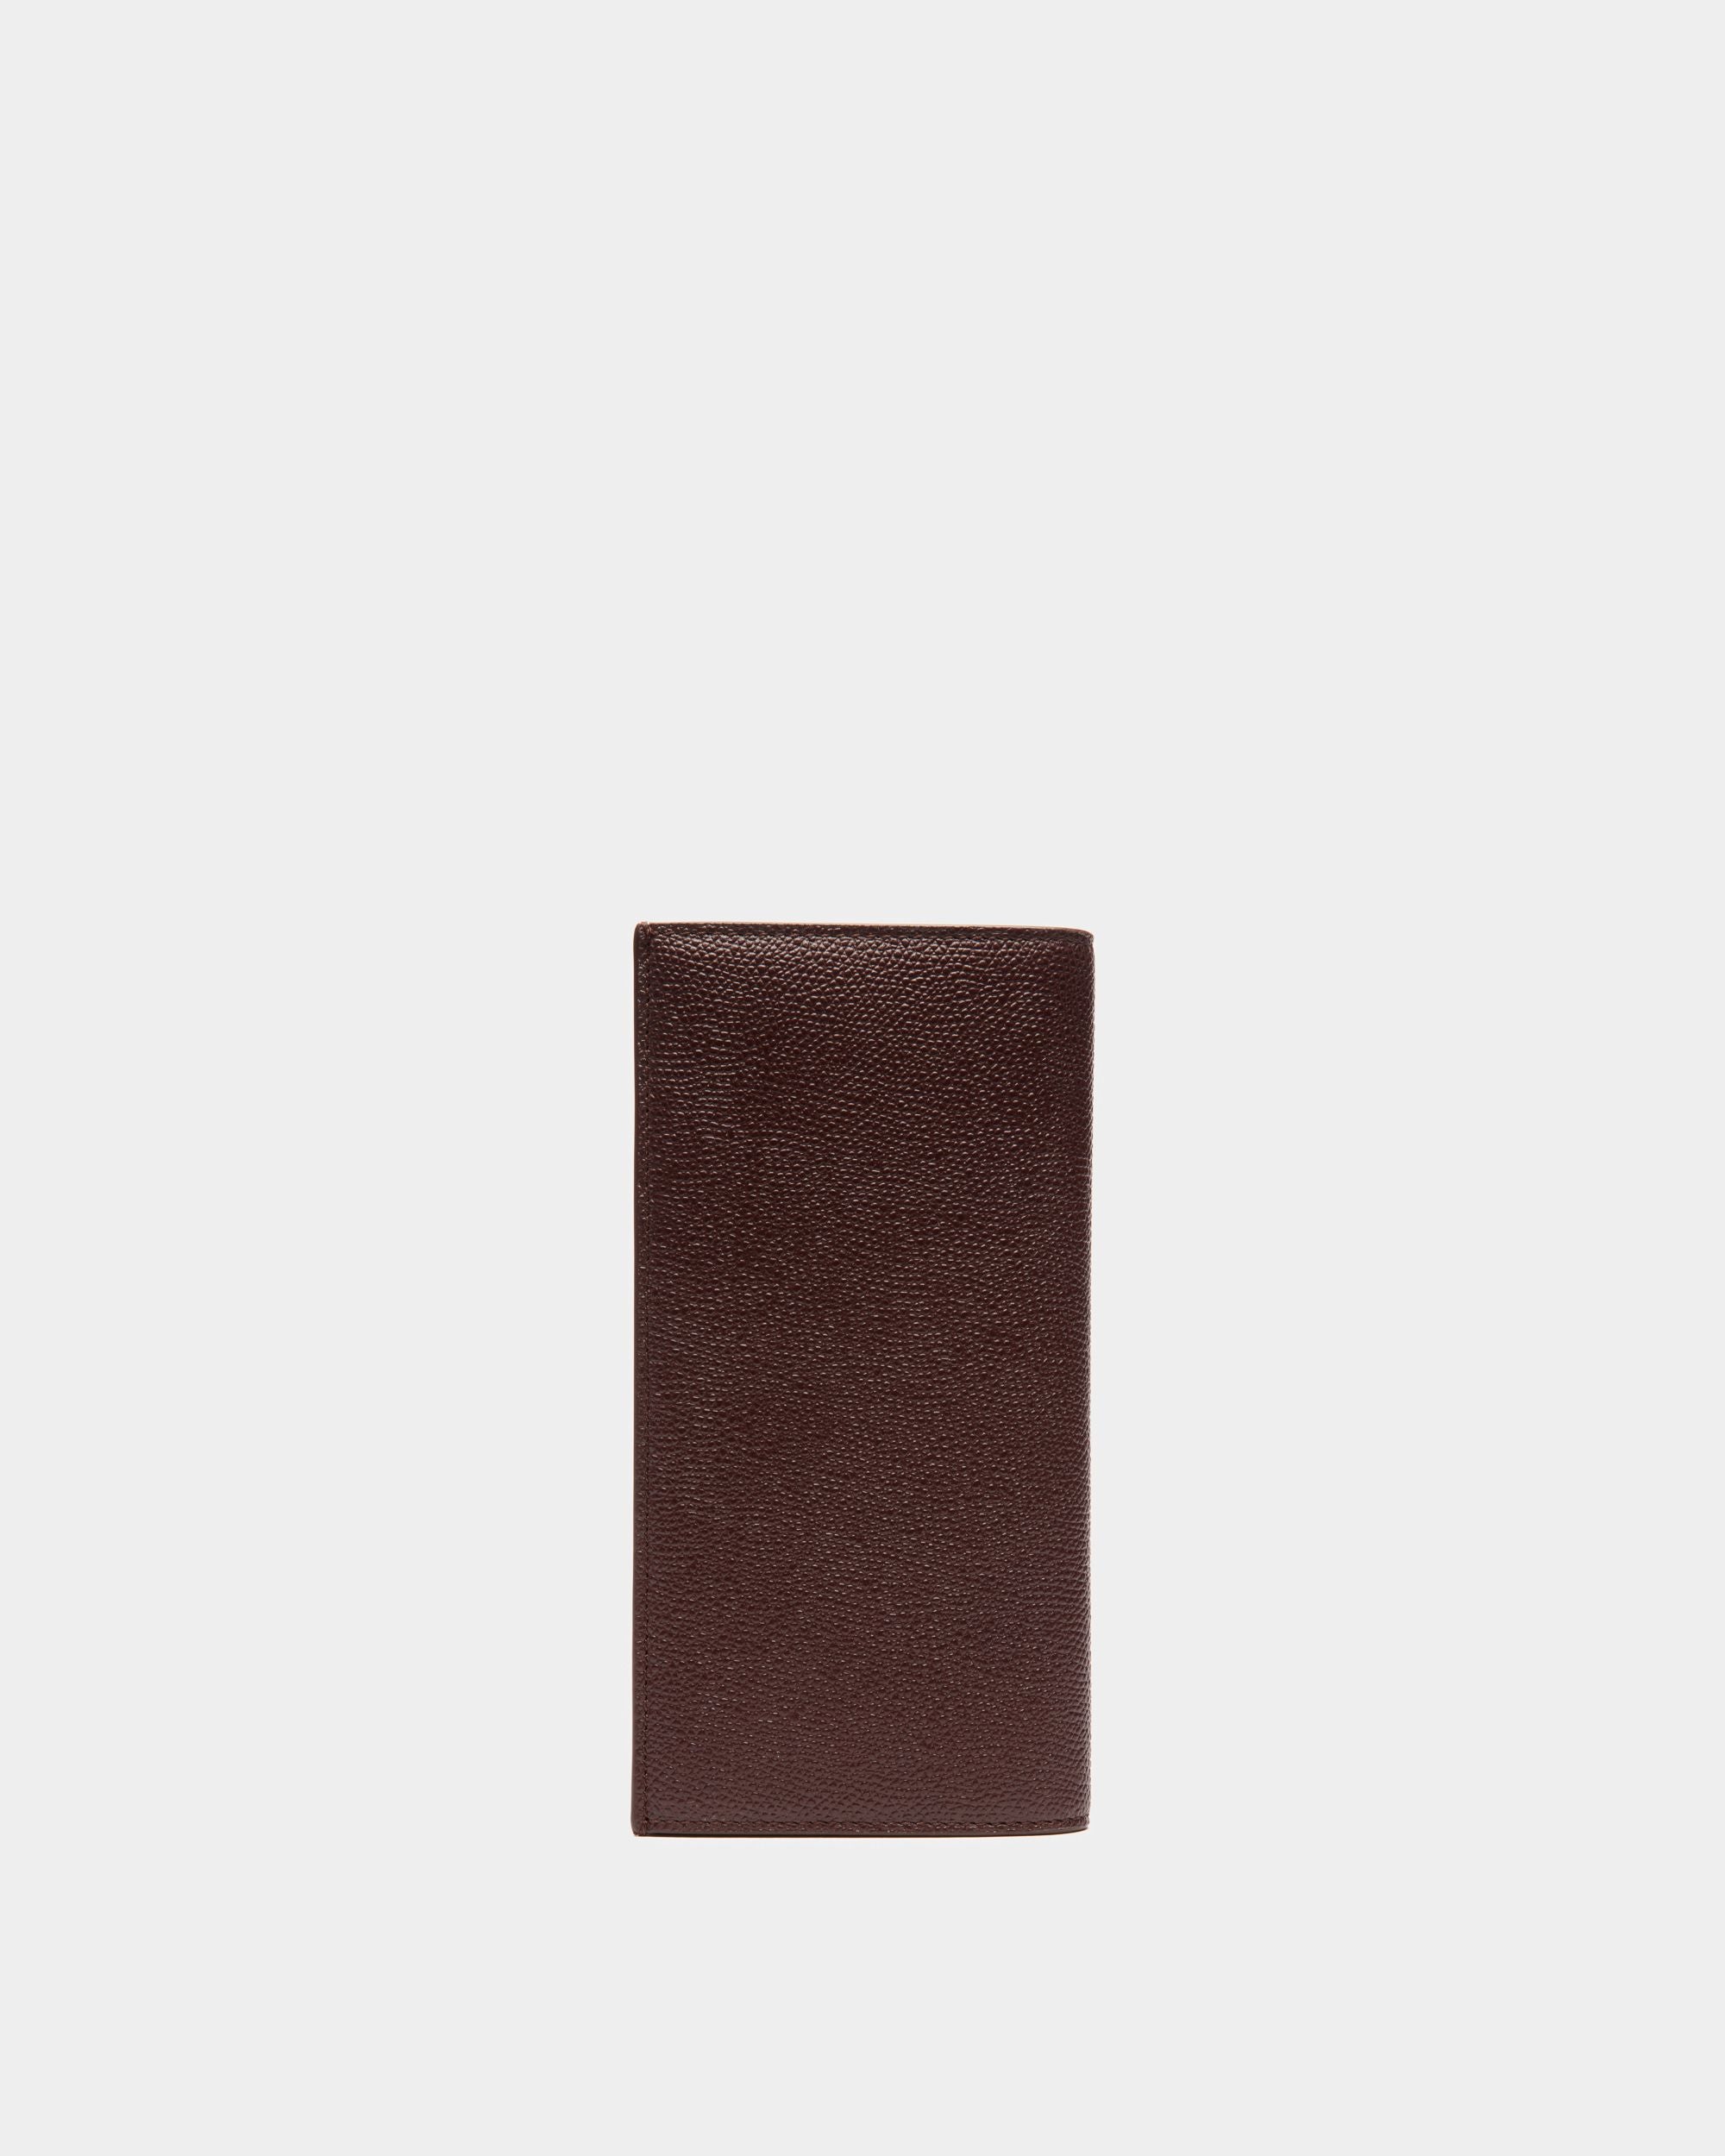 Flag | Men's Continental Wallet in Chestnut Brown Grained Leather | Bally | Still Life Back